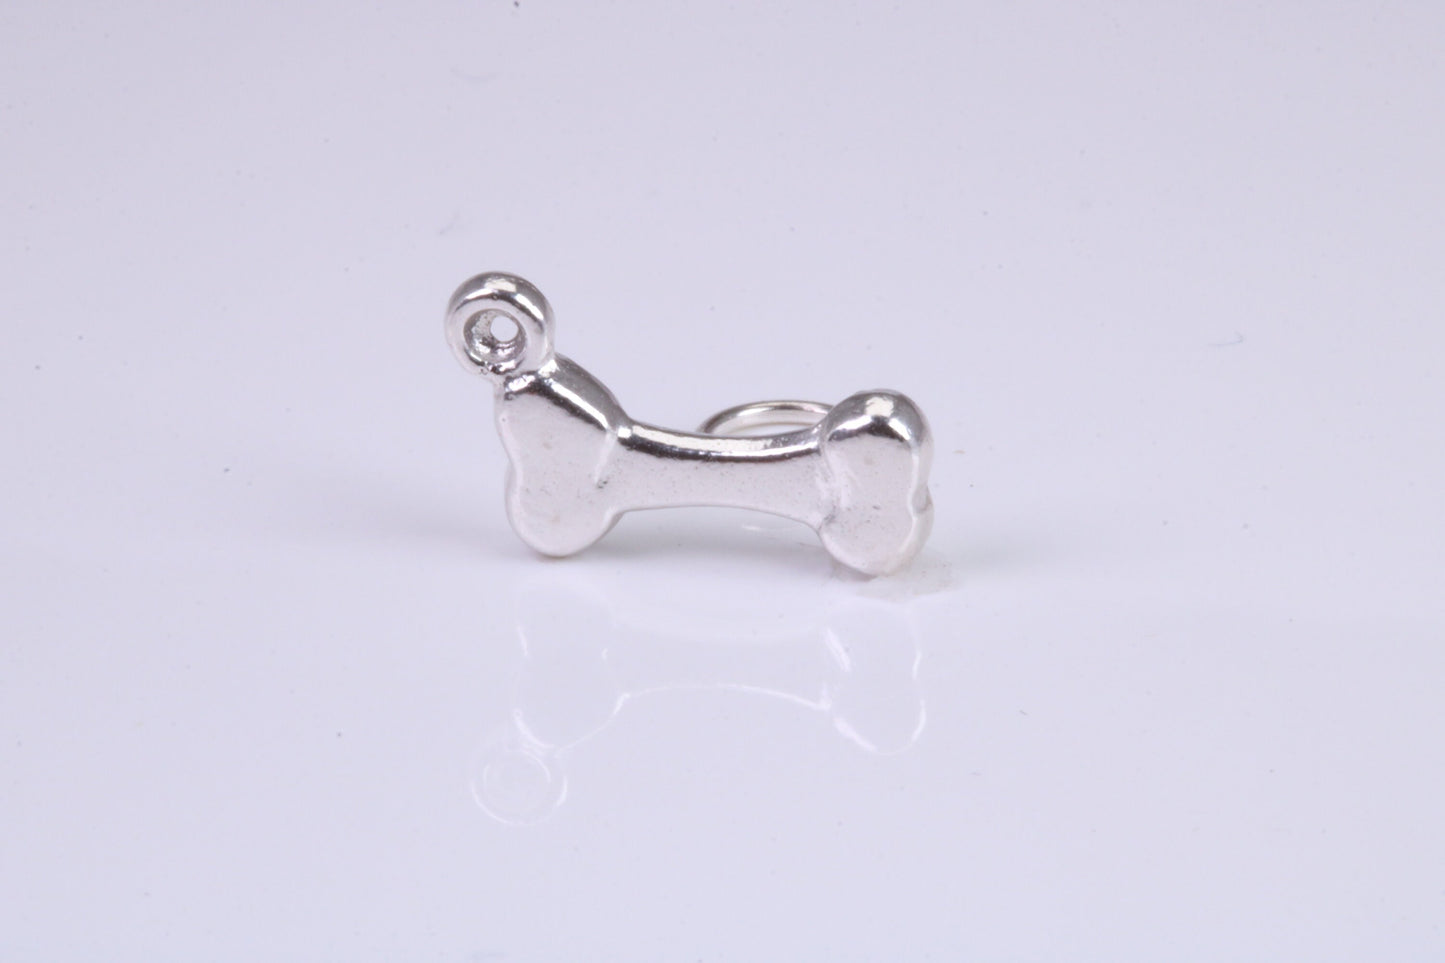 Dog Bone Charm, Traditional Charm, Made from Solid 925 Grade Sterling Silver, Complete with Attachment Link